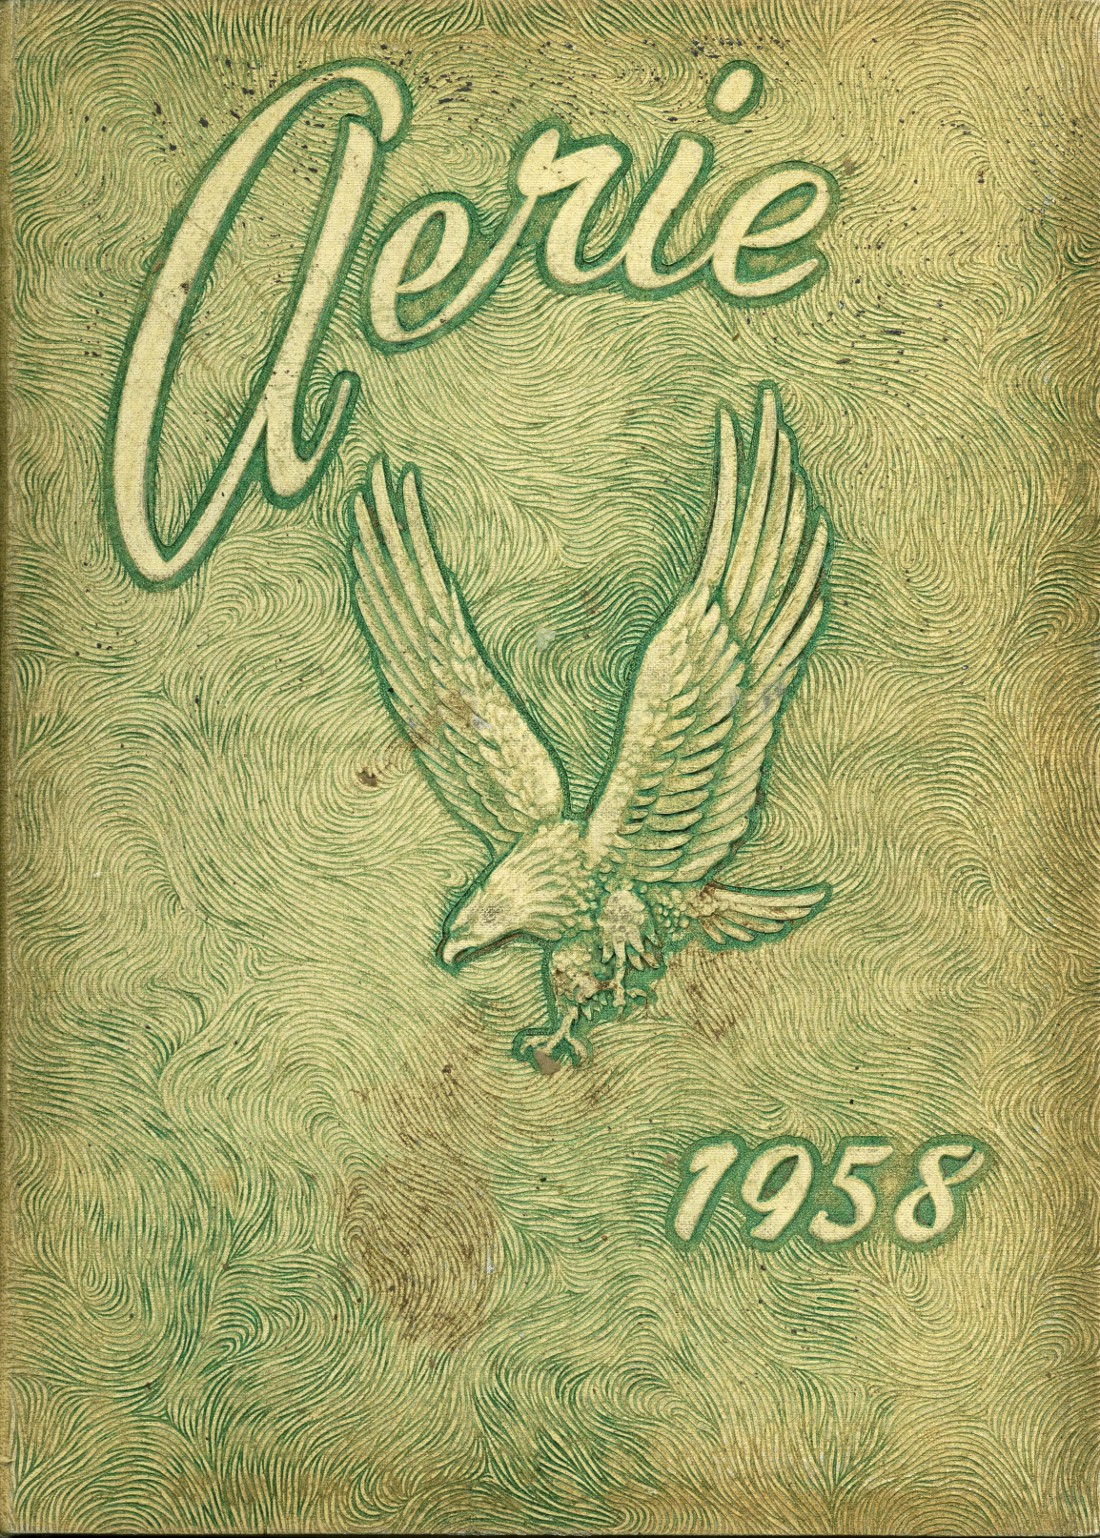 1958-yearbook-from-christian-brothers-high-school-from-st-joseph-missouri